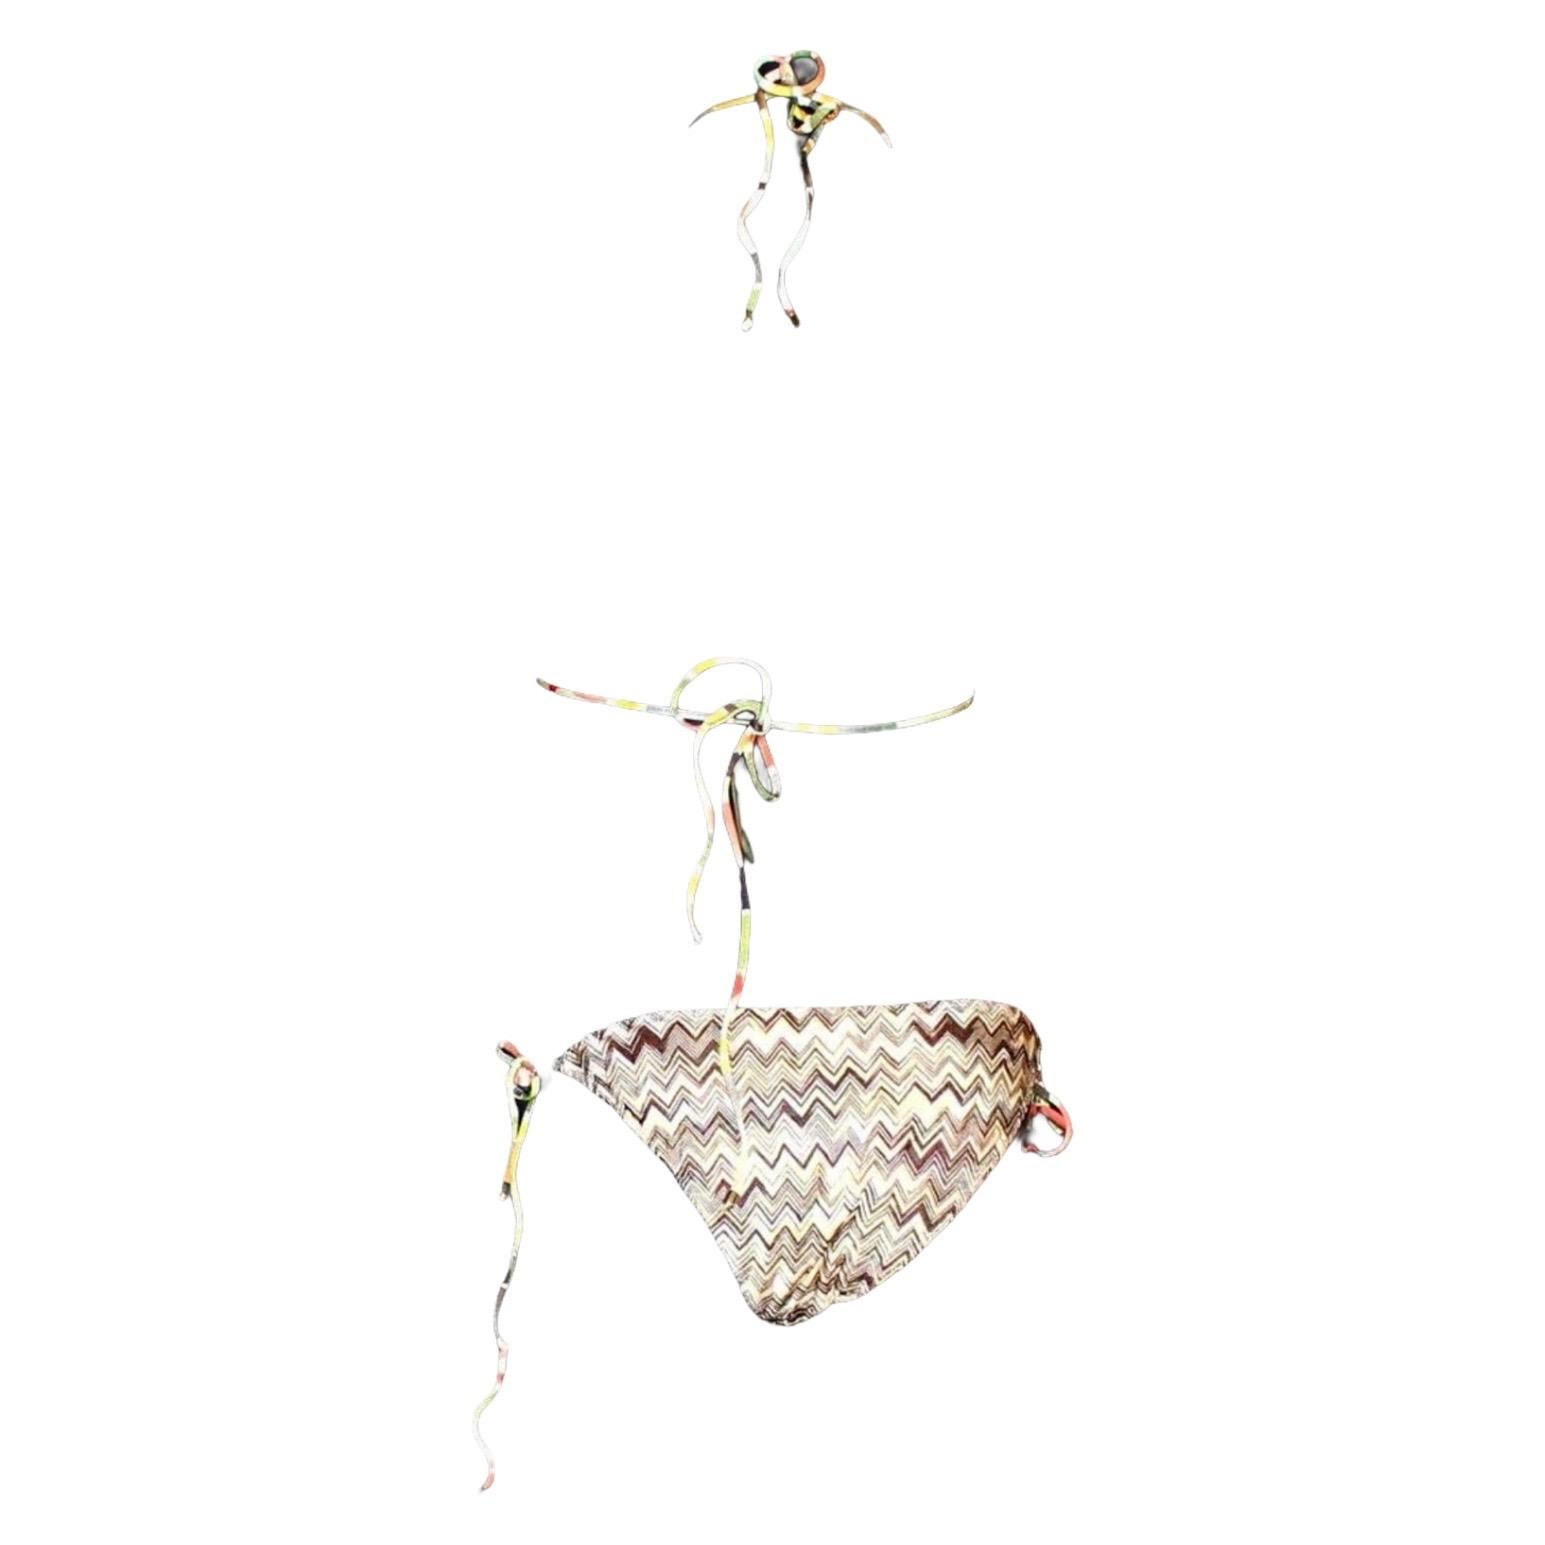 
This stunning Missoni bikini is a '70s-inspired poolside piece. Team this classic crochet knit bikini with the matching kaftan for a beautifully bold vacation look. 

Two pieces bikini 
Tiestring, hardware on ends engraved 